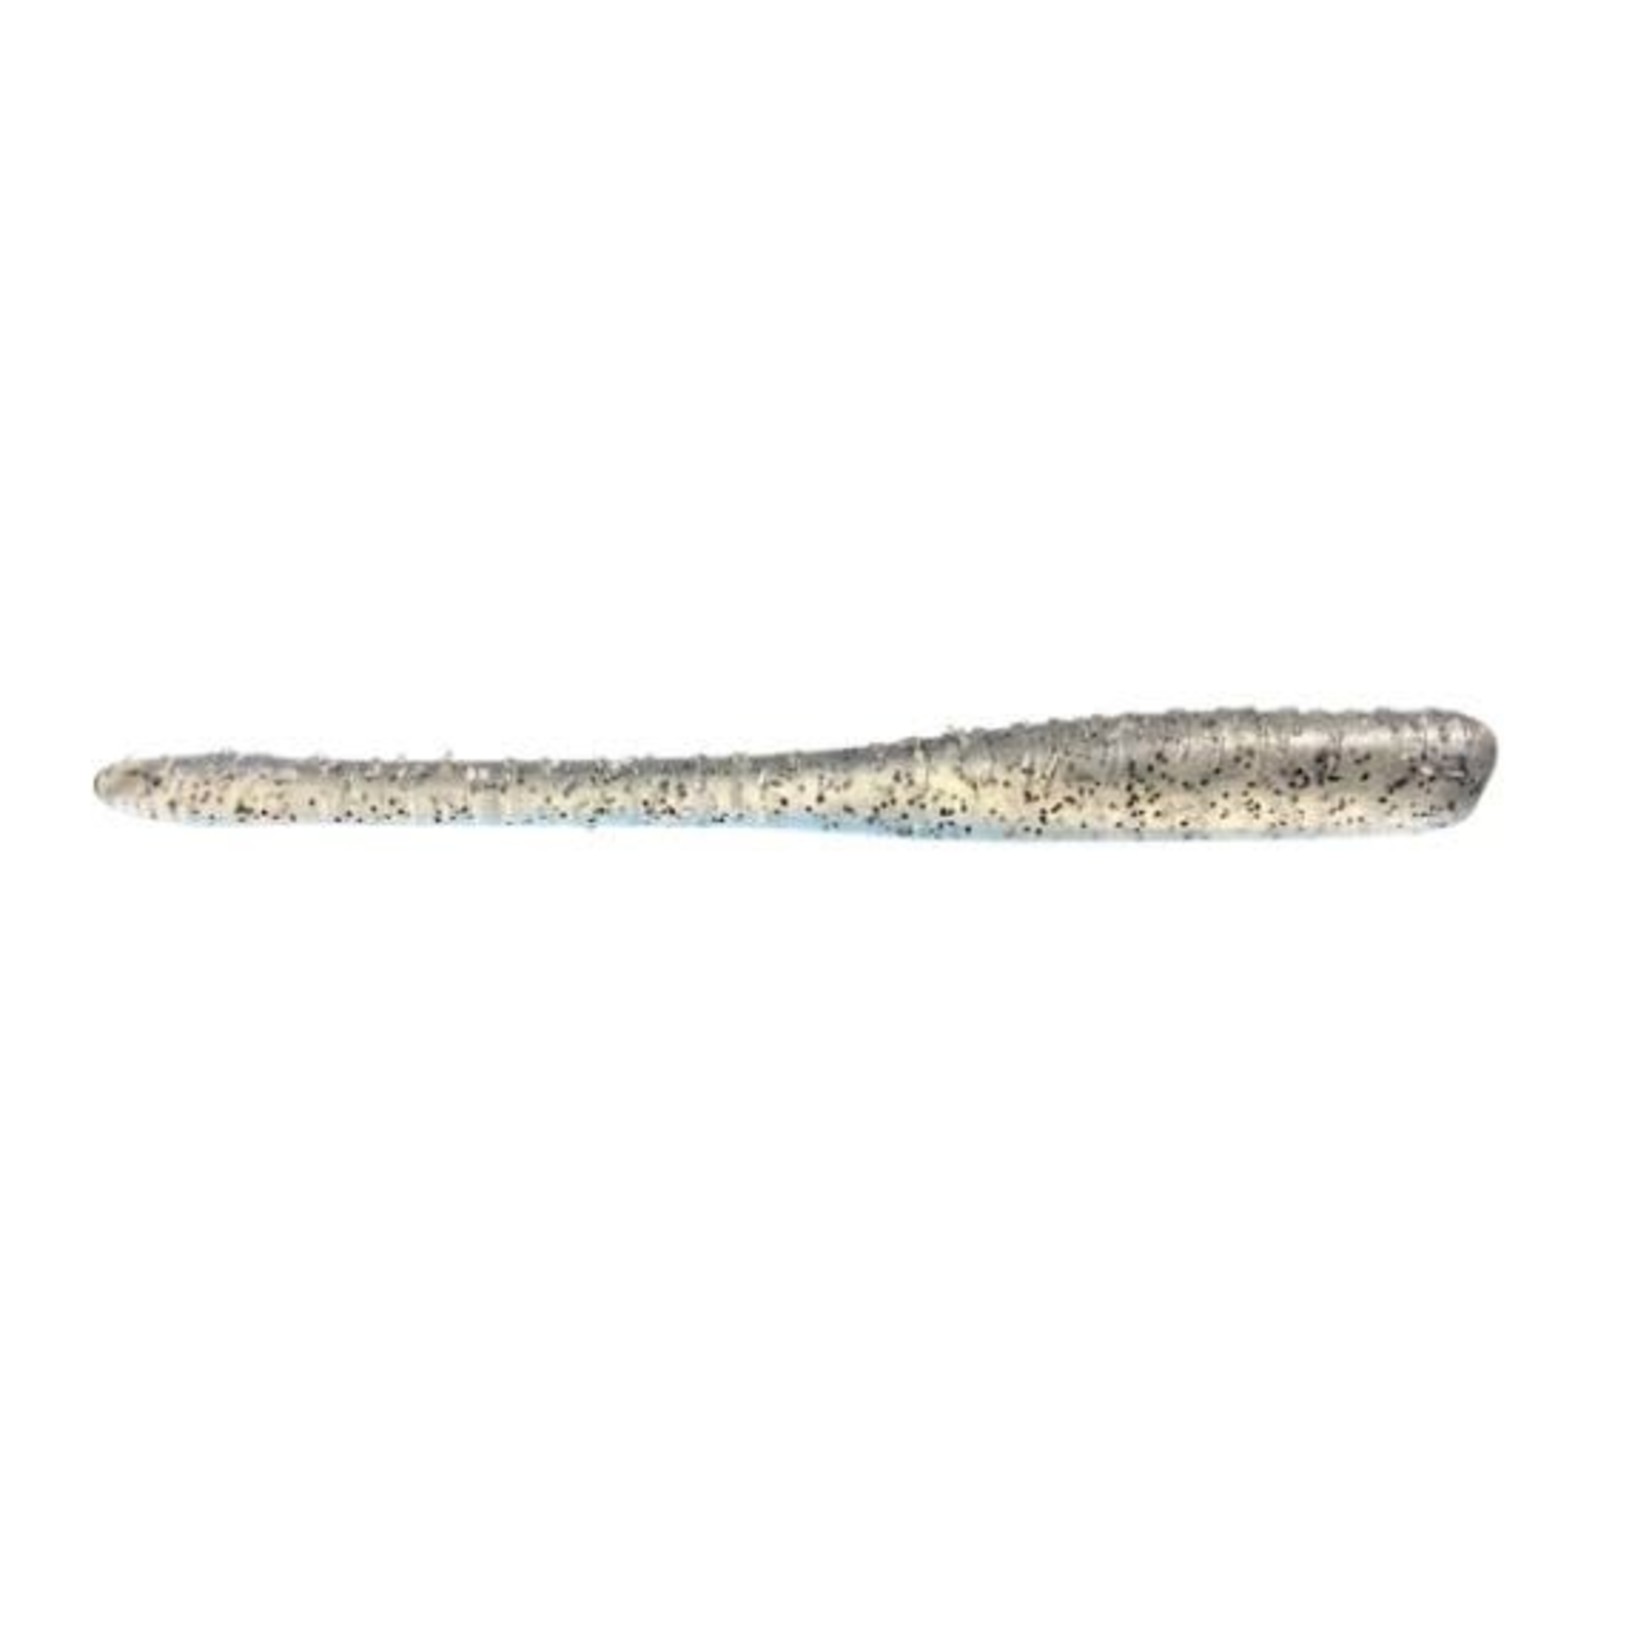 Great Lakes Finesse Great Lakes Finesse 4" Drop Worm